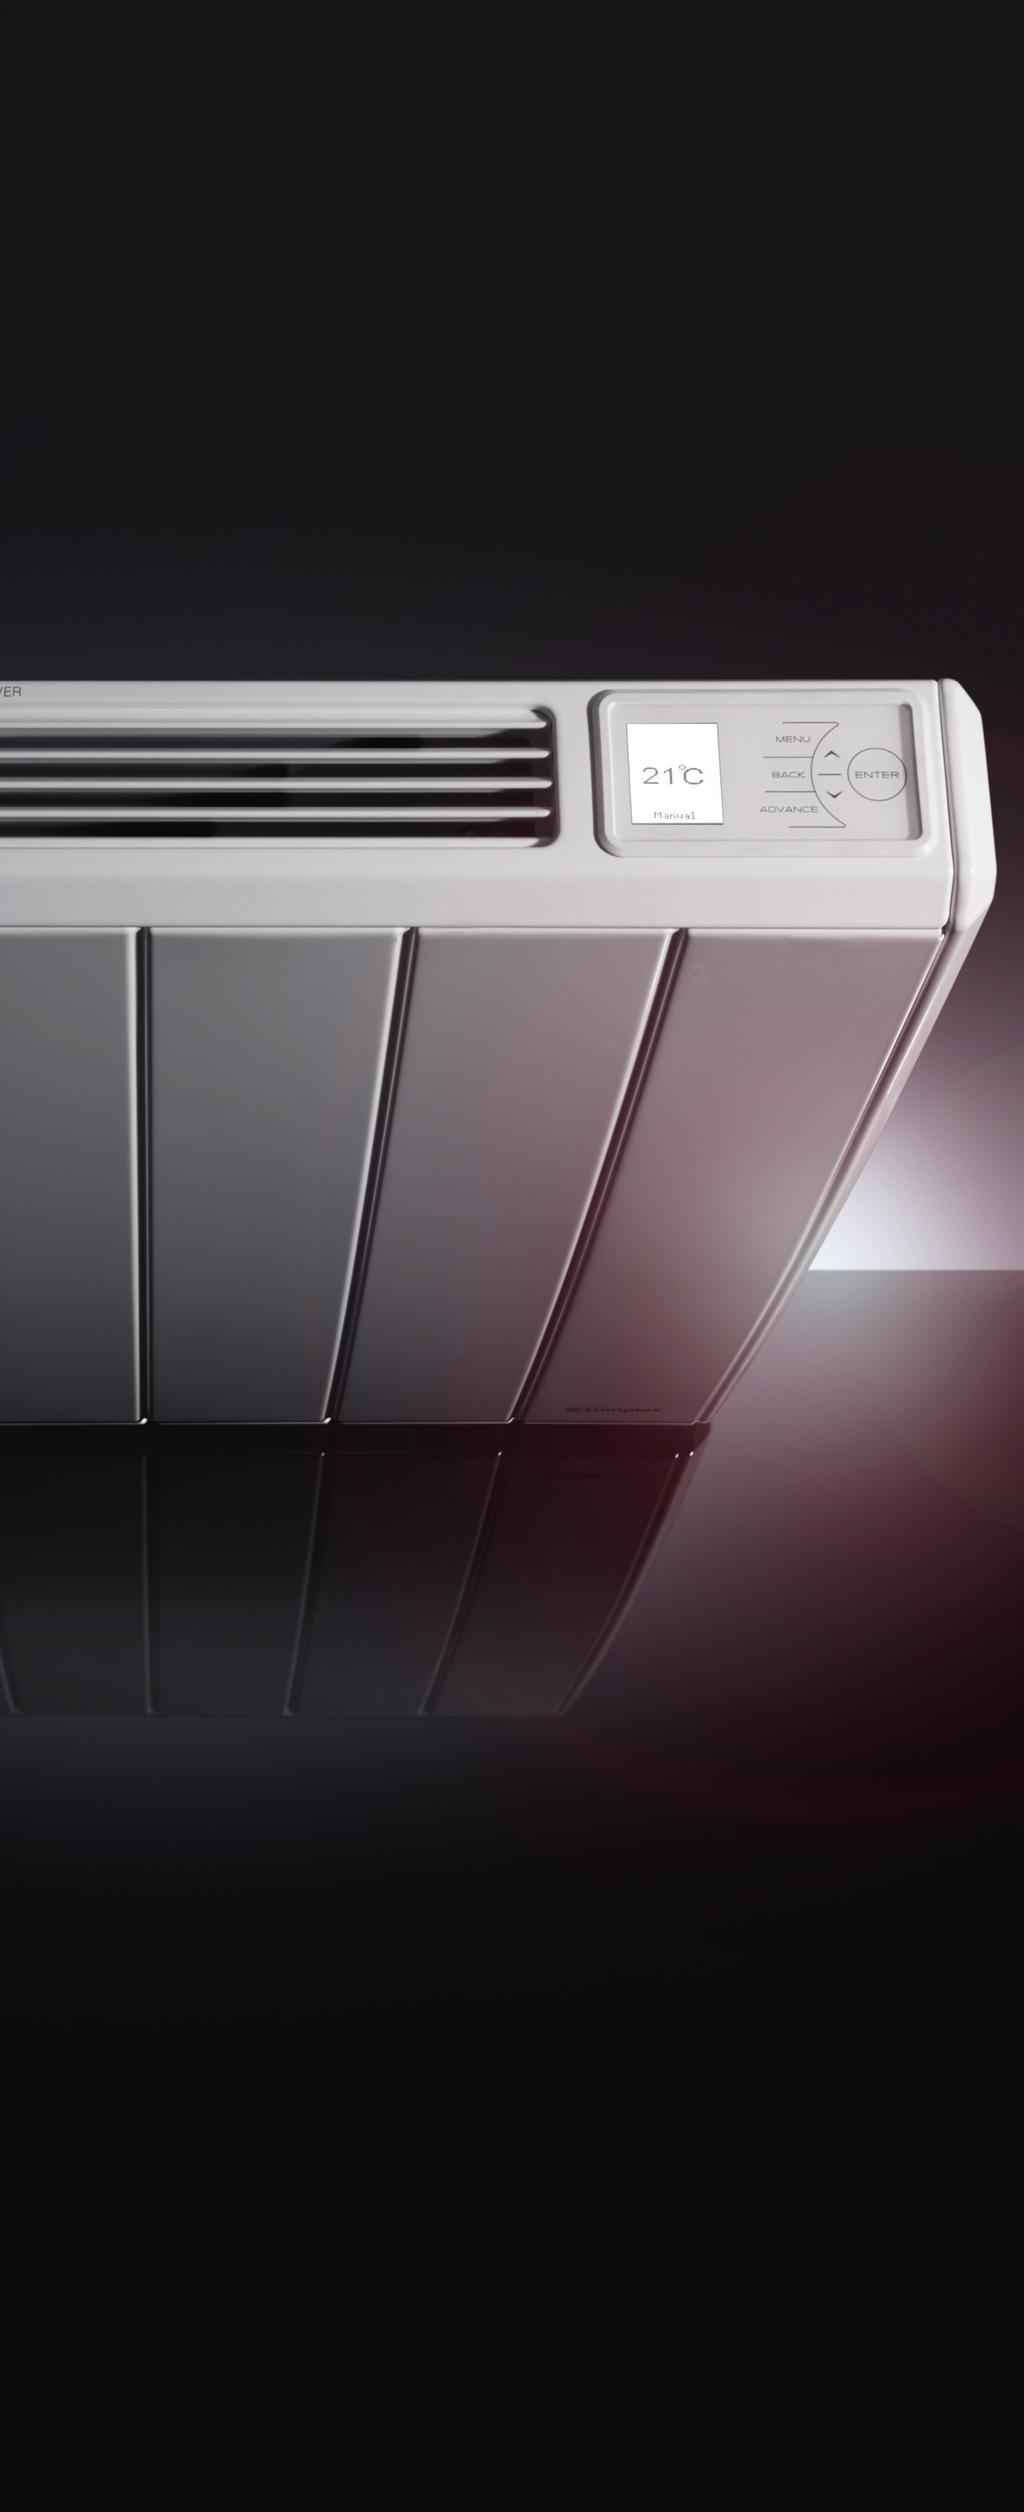 Why is Q-Rad so good? Intelligent electric radiator. Eco-Start delayed anticipatory control the heater decides when to turn on to ensure target temperature is achieved at the selected time.